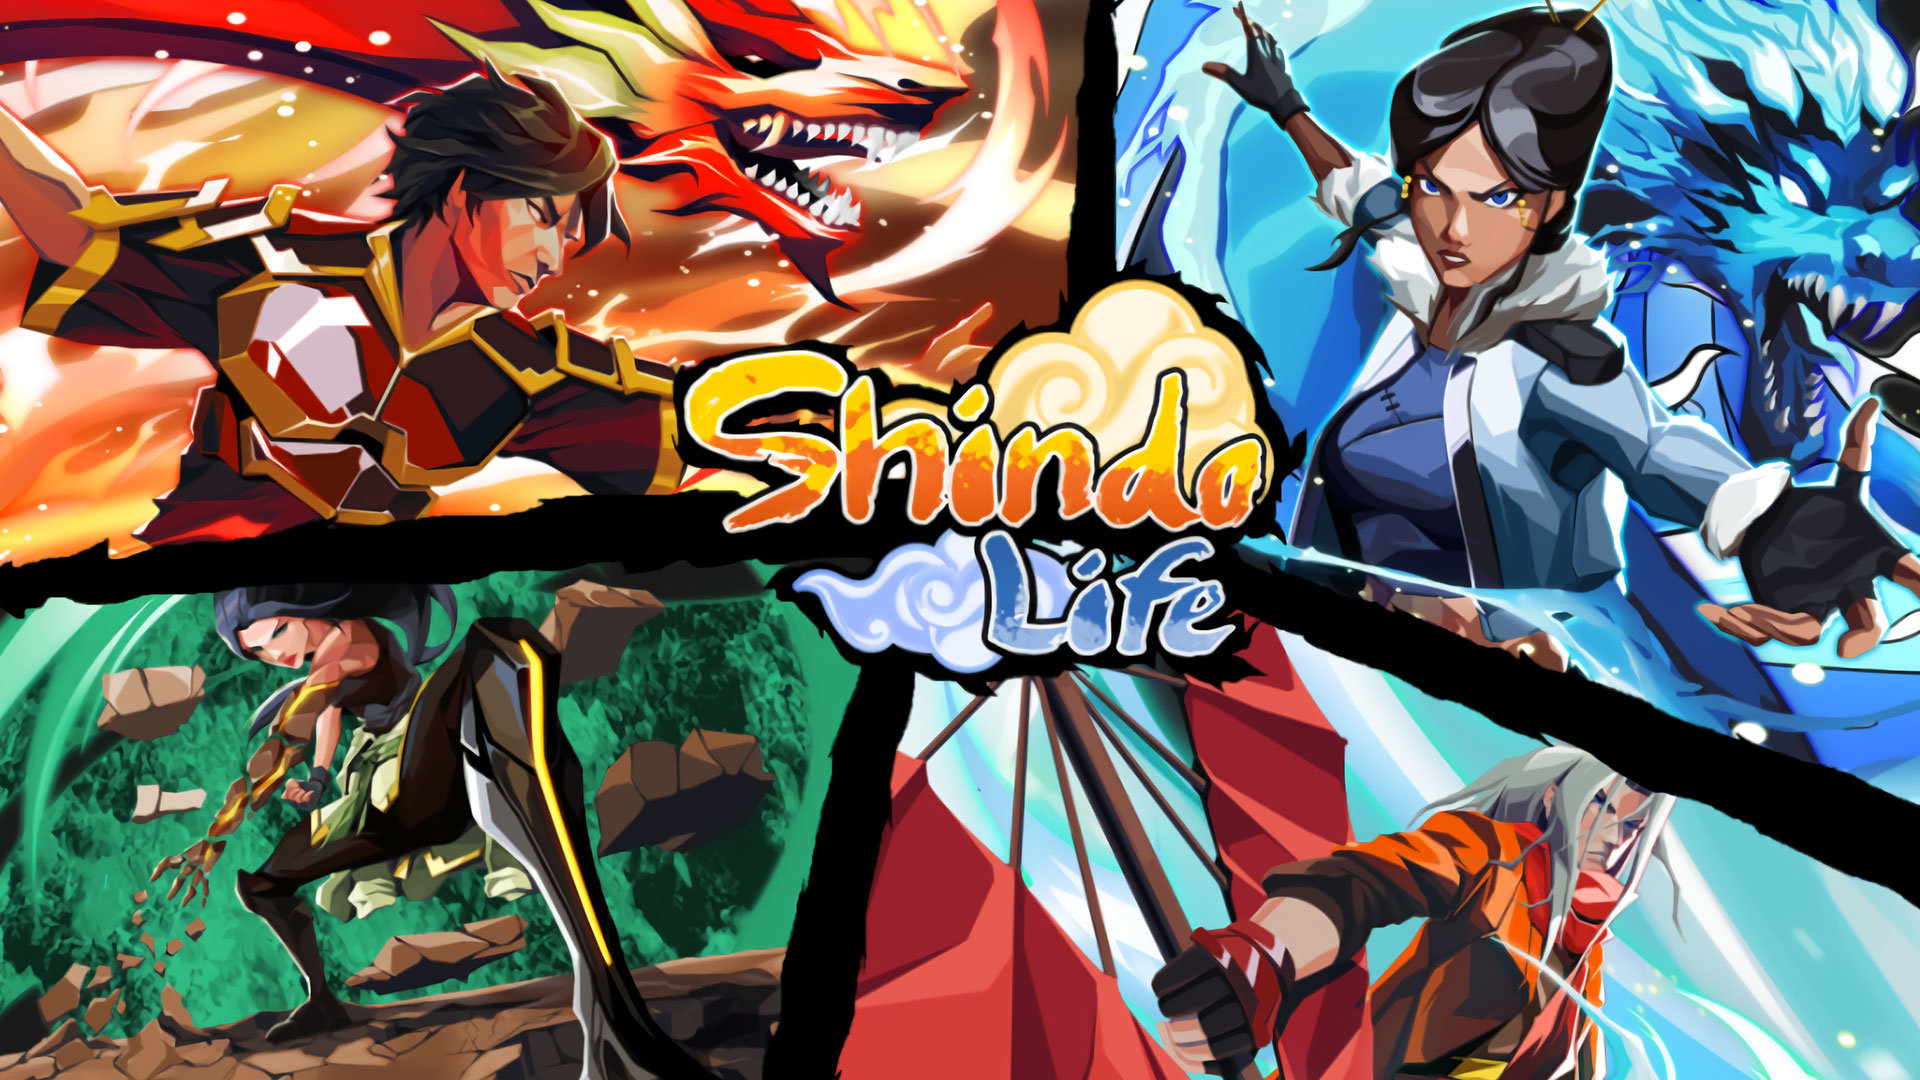 Forest of embers codes Shindo Life 